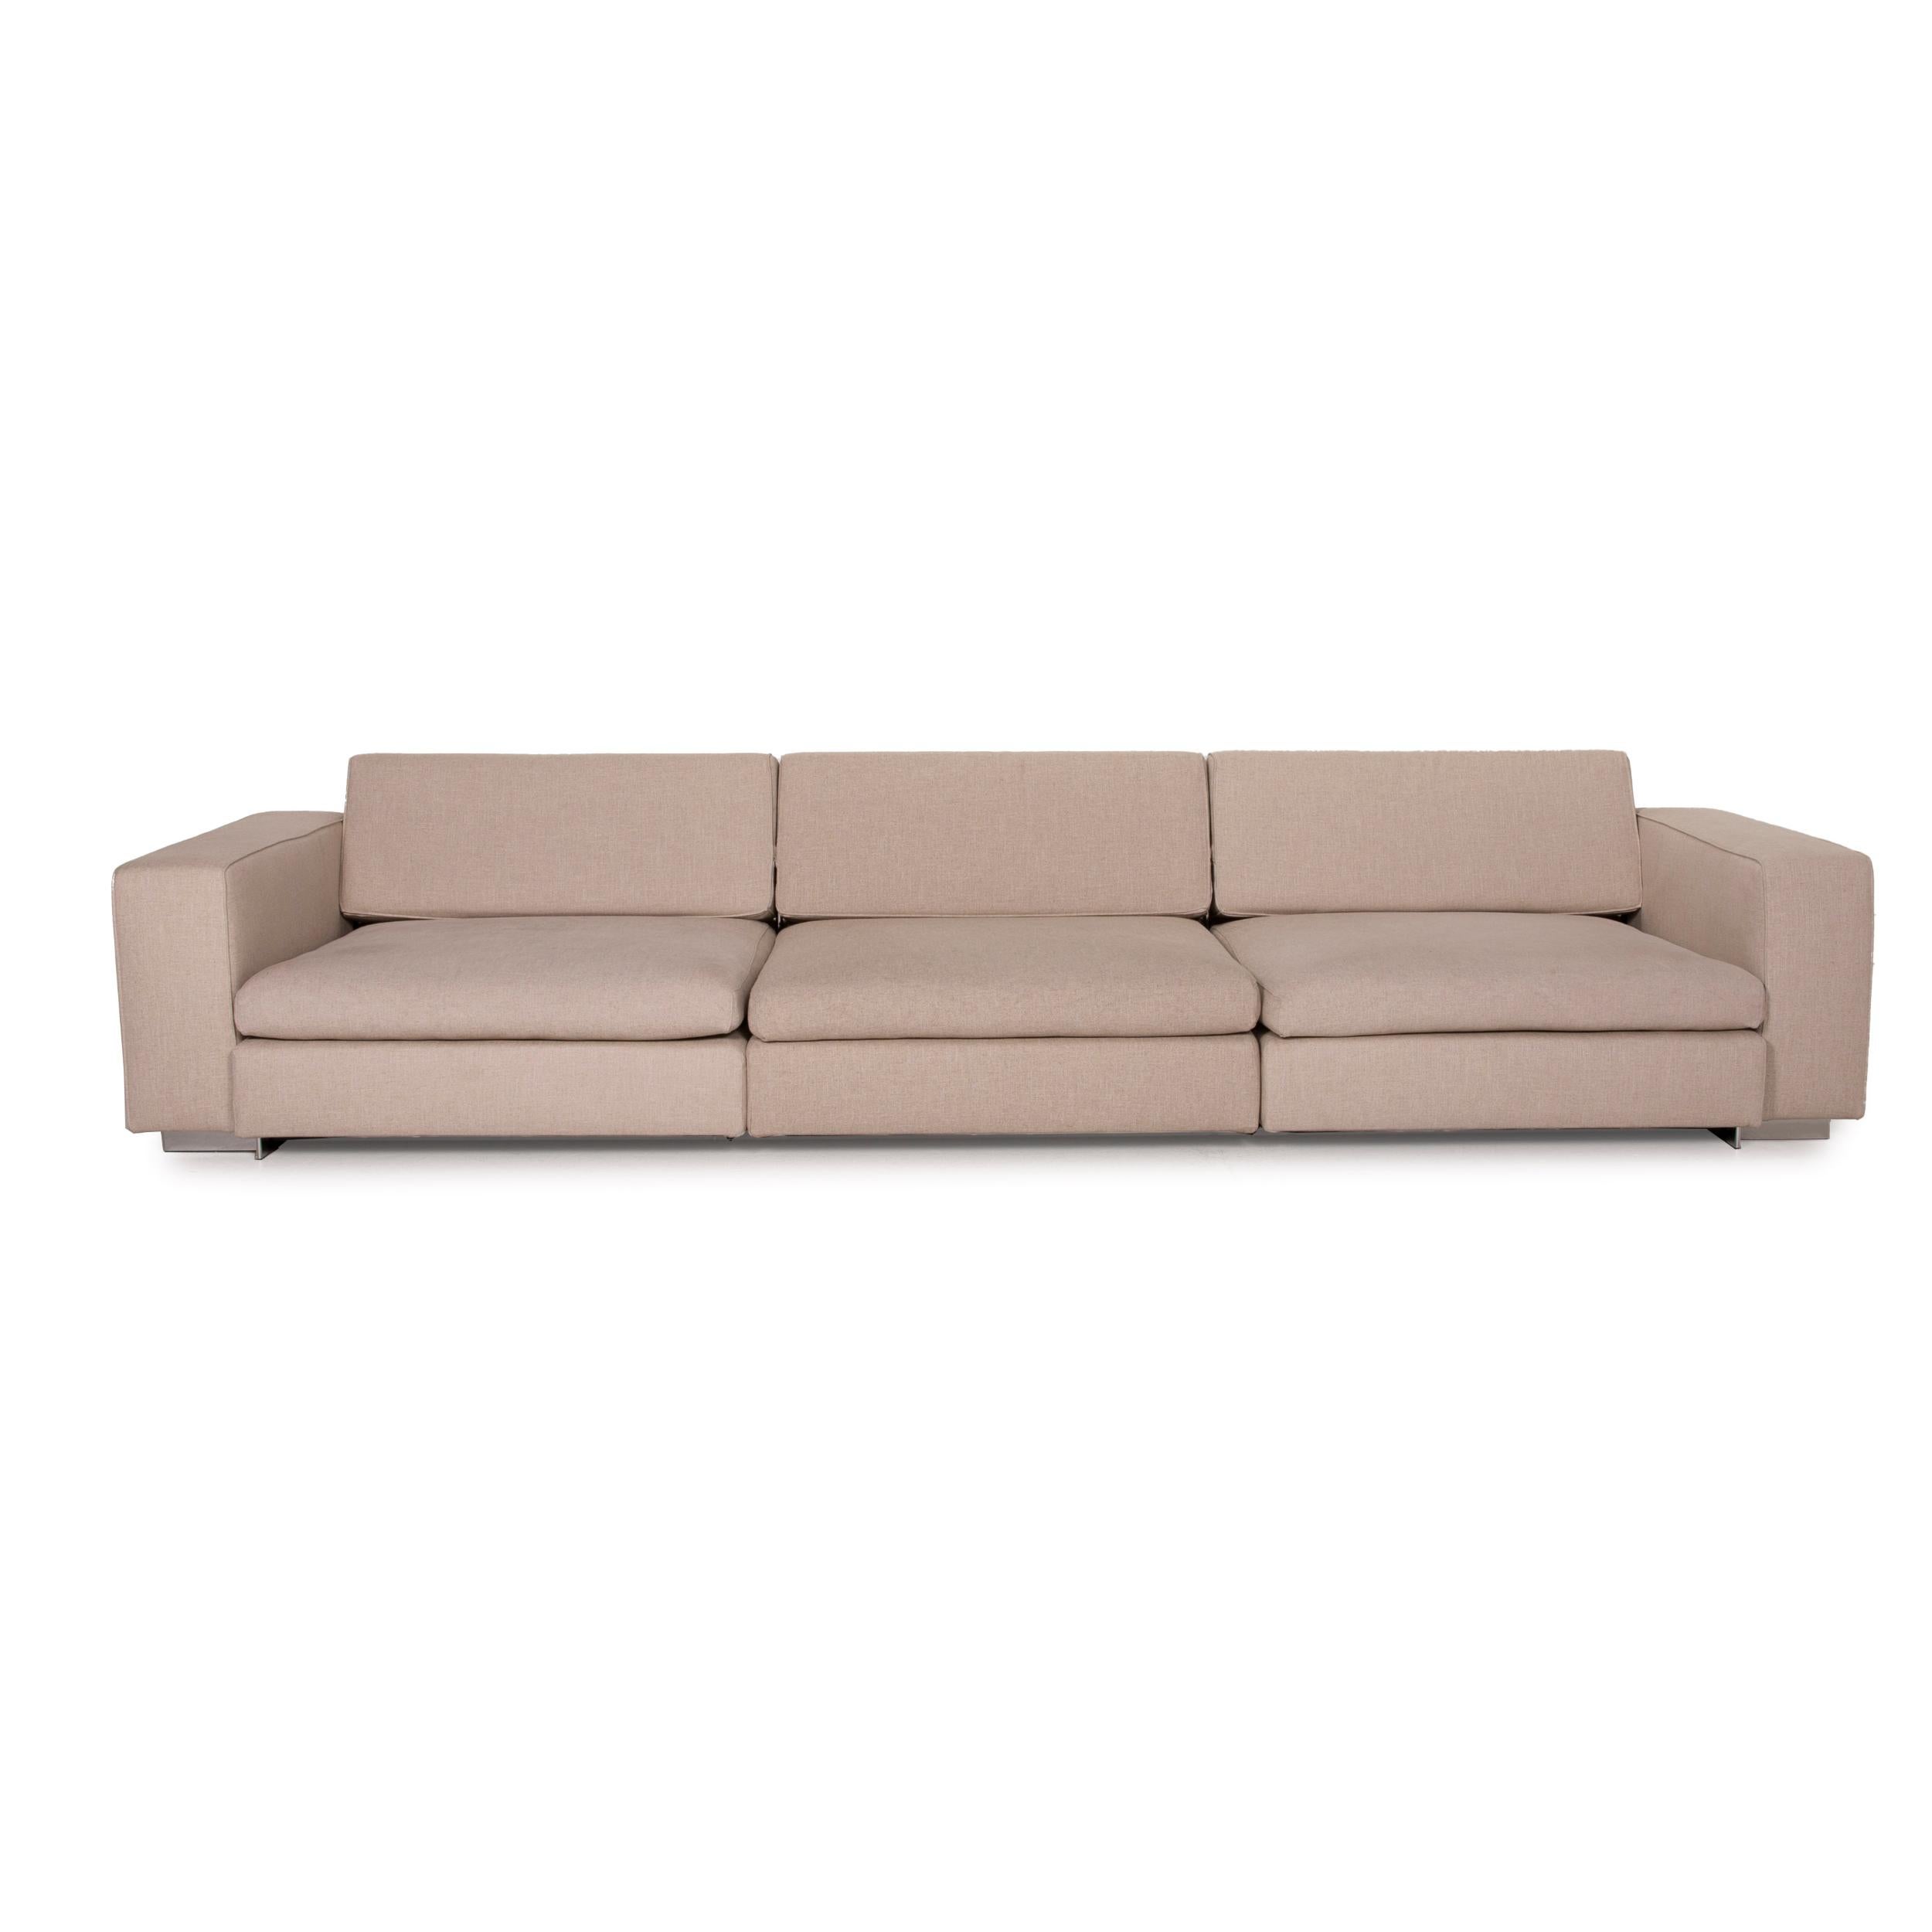 Molteni Turner Fabric Sofa Set Beige 1 Three-Seater 1 Two-Seater Function For Sale 5